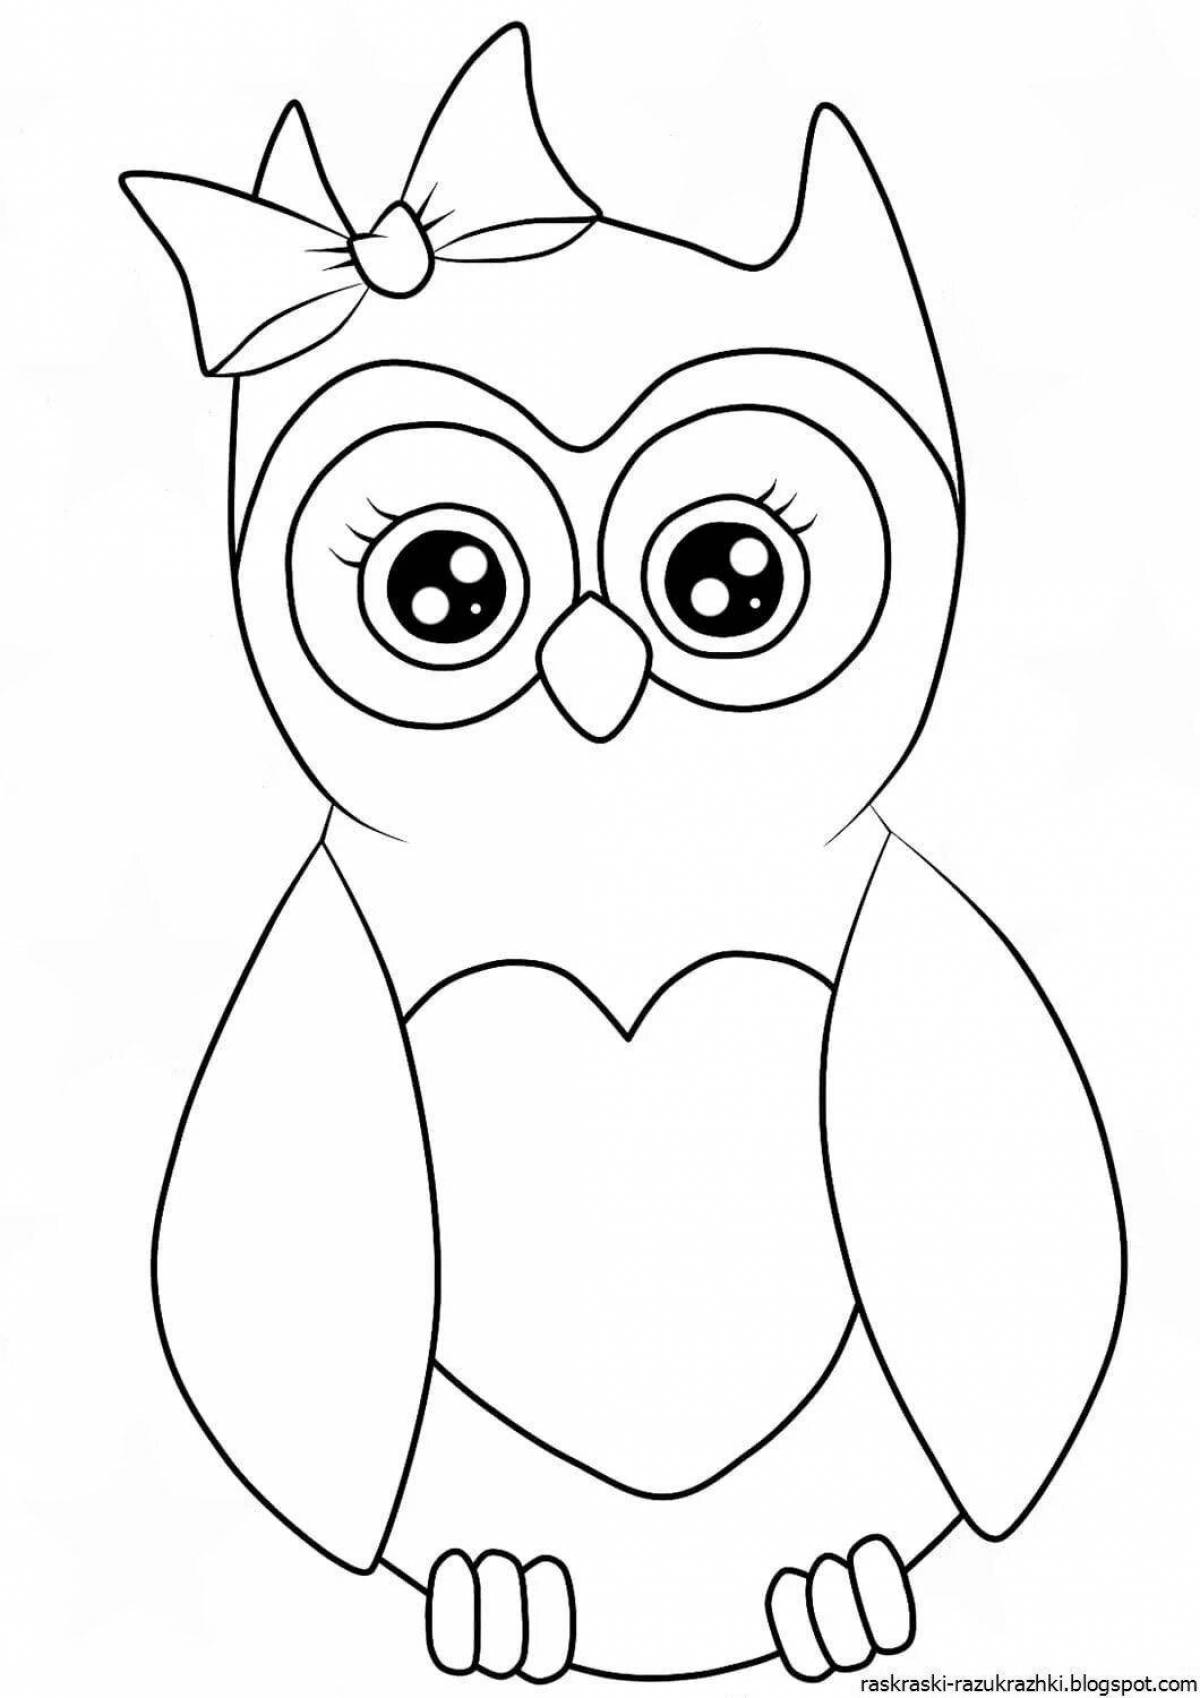 Amazing owl coloring page for kids